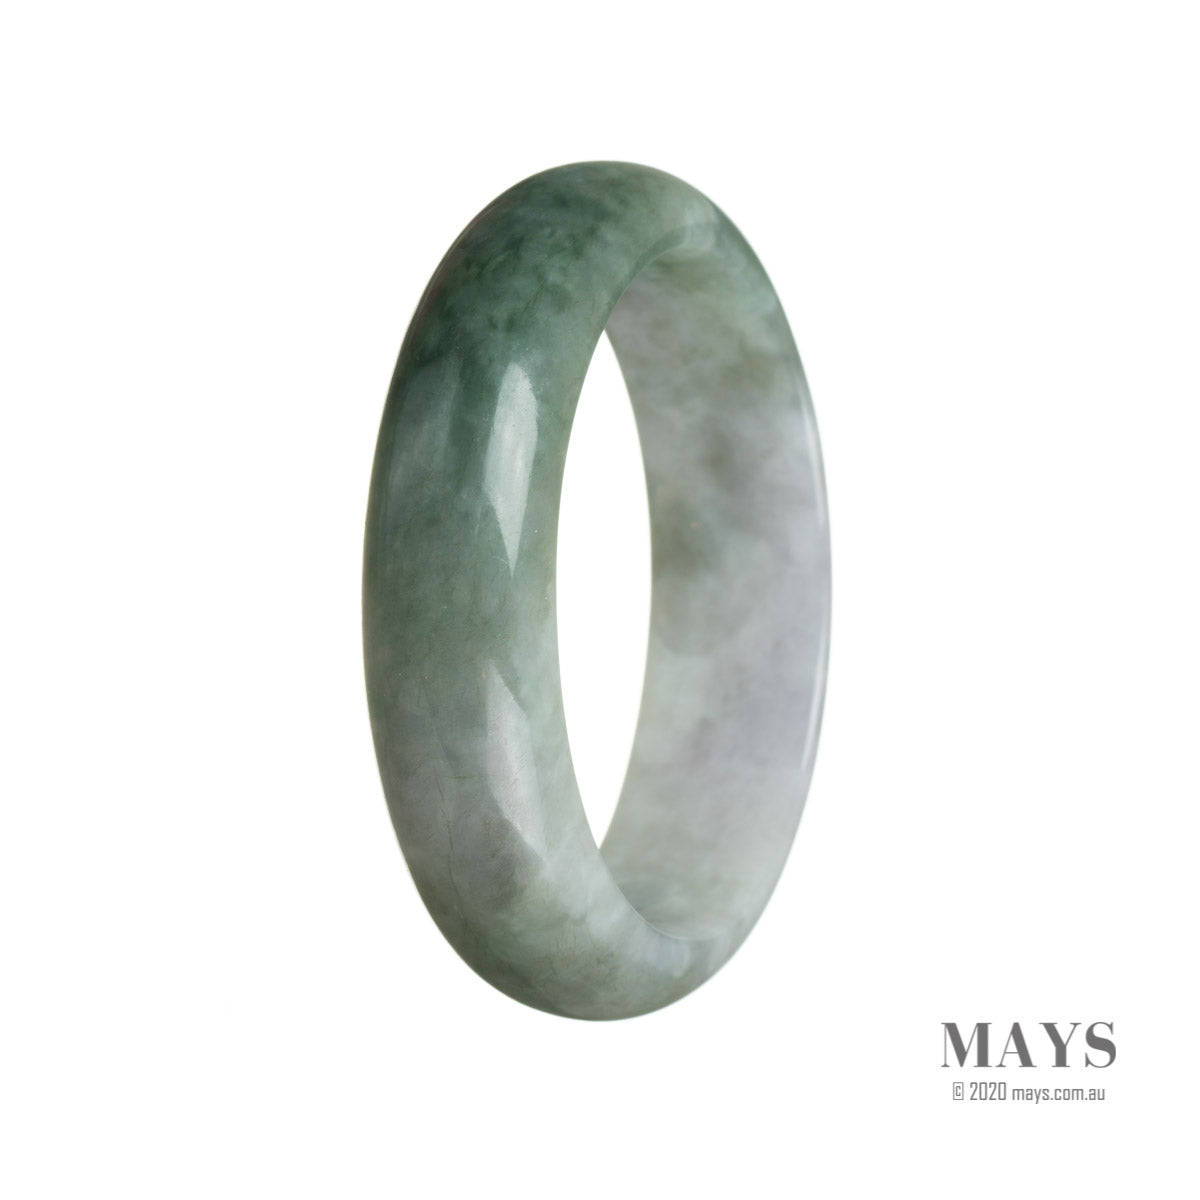 A beautiful green and lavender jade bangle bracelet with a half moon shape, made from genuine Grade A jadeite jade.